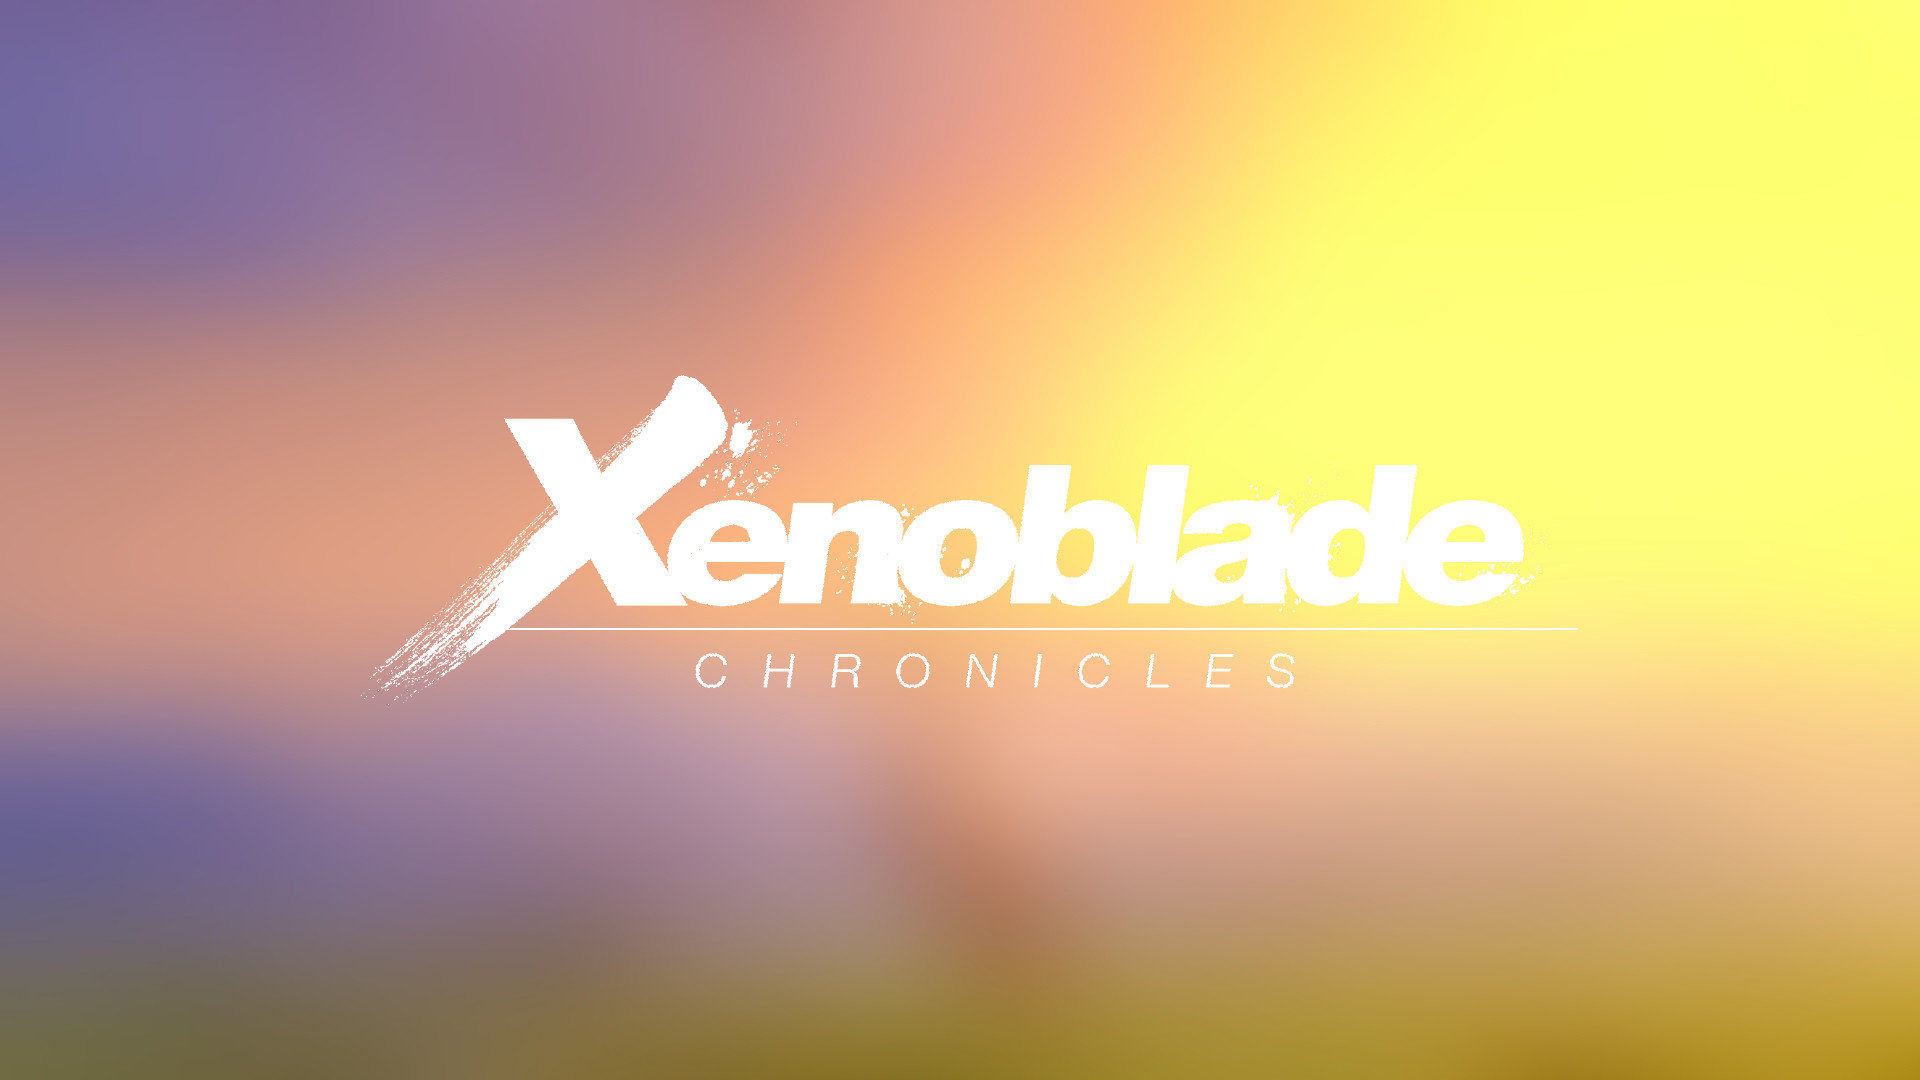 Download Full Hd 1080p Xenoblade Chronicles Pc Wallpaper - Xenoblade Chronicles , HD Wallpaper & Backgrounds